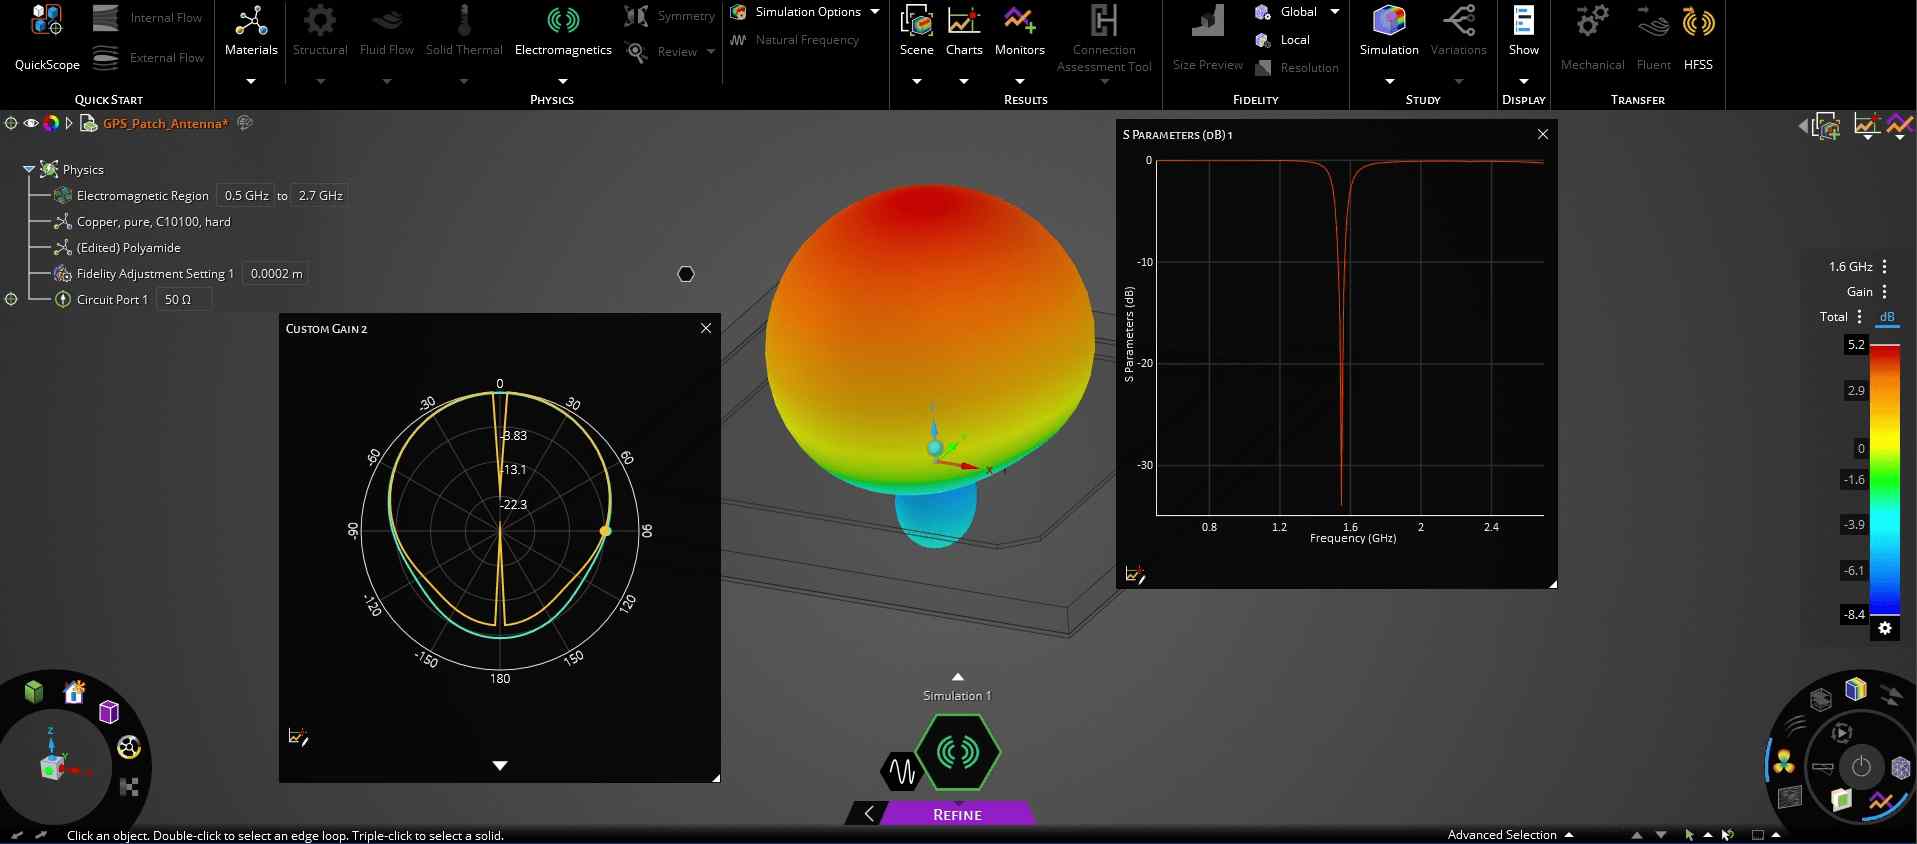 Ansys Discovery application with data visualized as charts